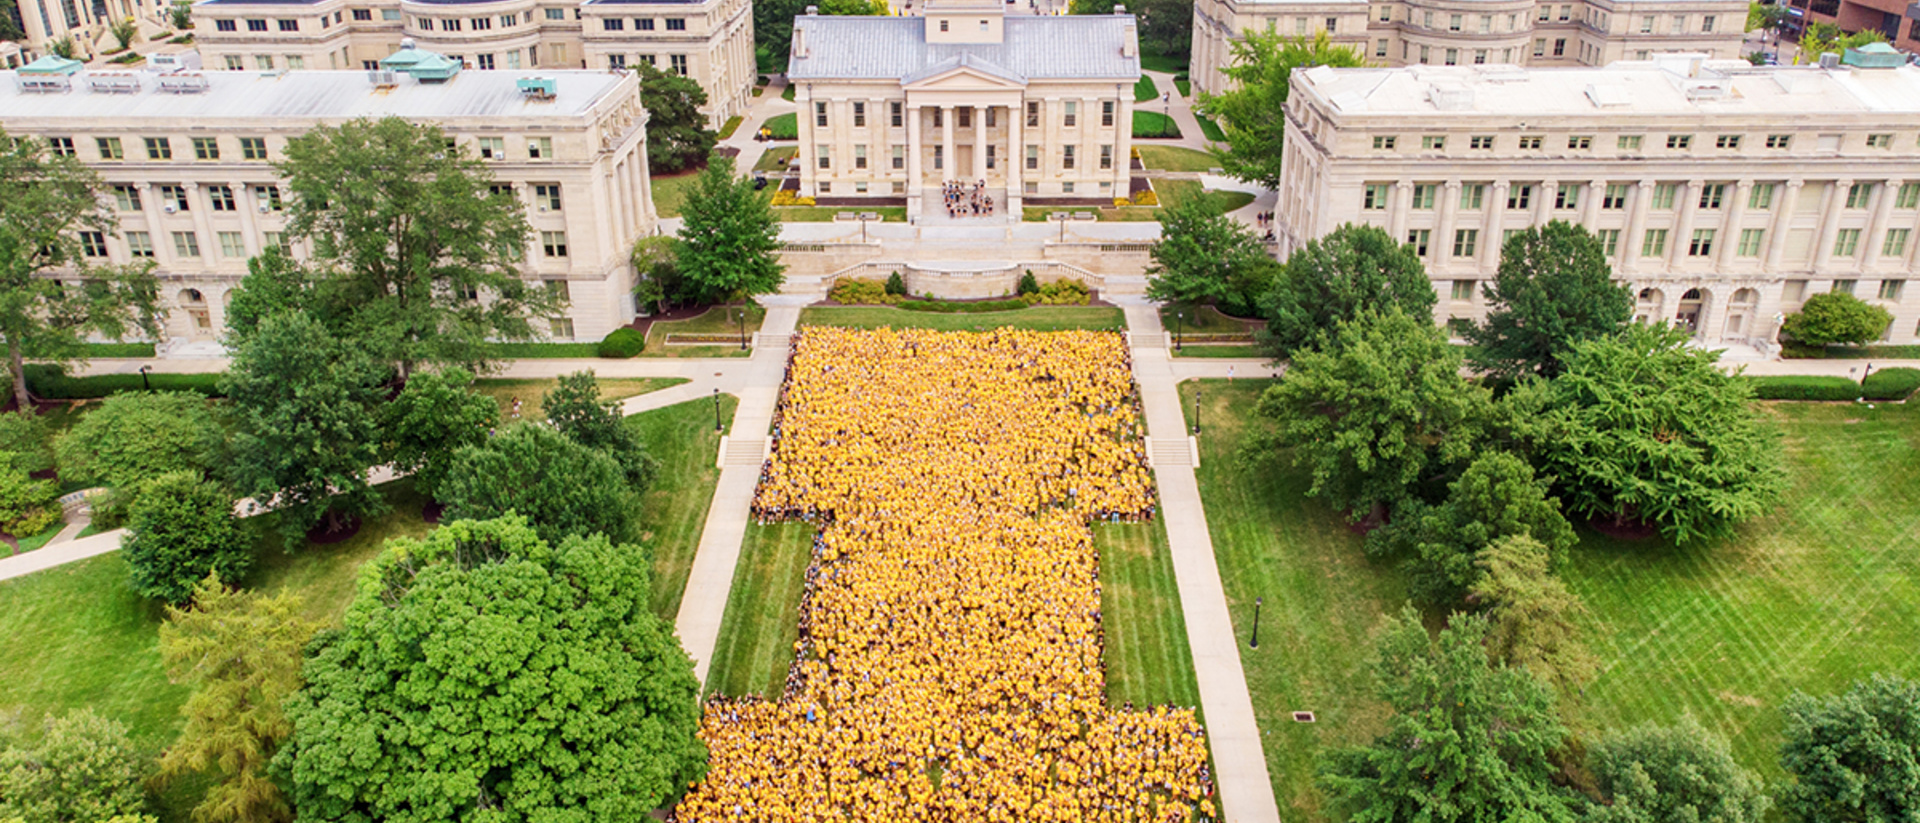 class-of-2026-brings-excitement-energy-to-campus-iowa-now-the